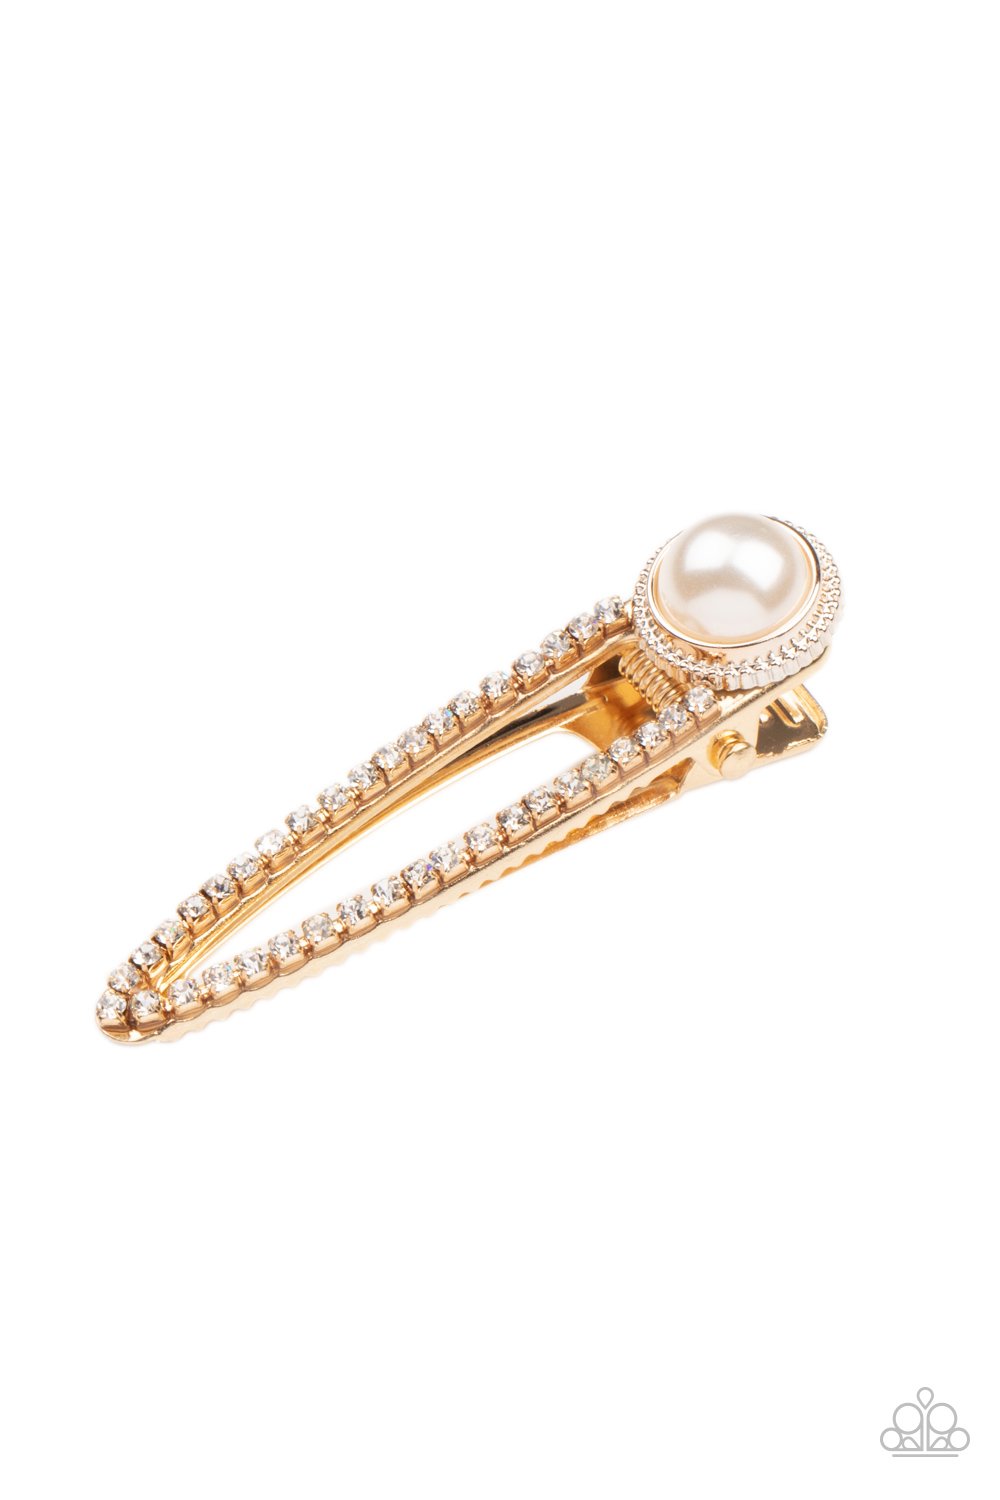 &lt;p&gt; Dotted with a bubbly pearl fitting, a classic gold frame is encrusted in glassy white rhinestones for a glamorous finish. Features a standard hair clip on the back.&lt;/p&gt;
 

 &lt;p&gt;&lt;i&gt;Sold as one individual hair clip. &lt;/i&gt;&lt;/p&gt;
 

 

&lt;h5&gt;Paparazzi Accessories • $5 Jewelry&lt;/h5&gt;